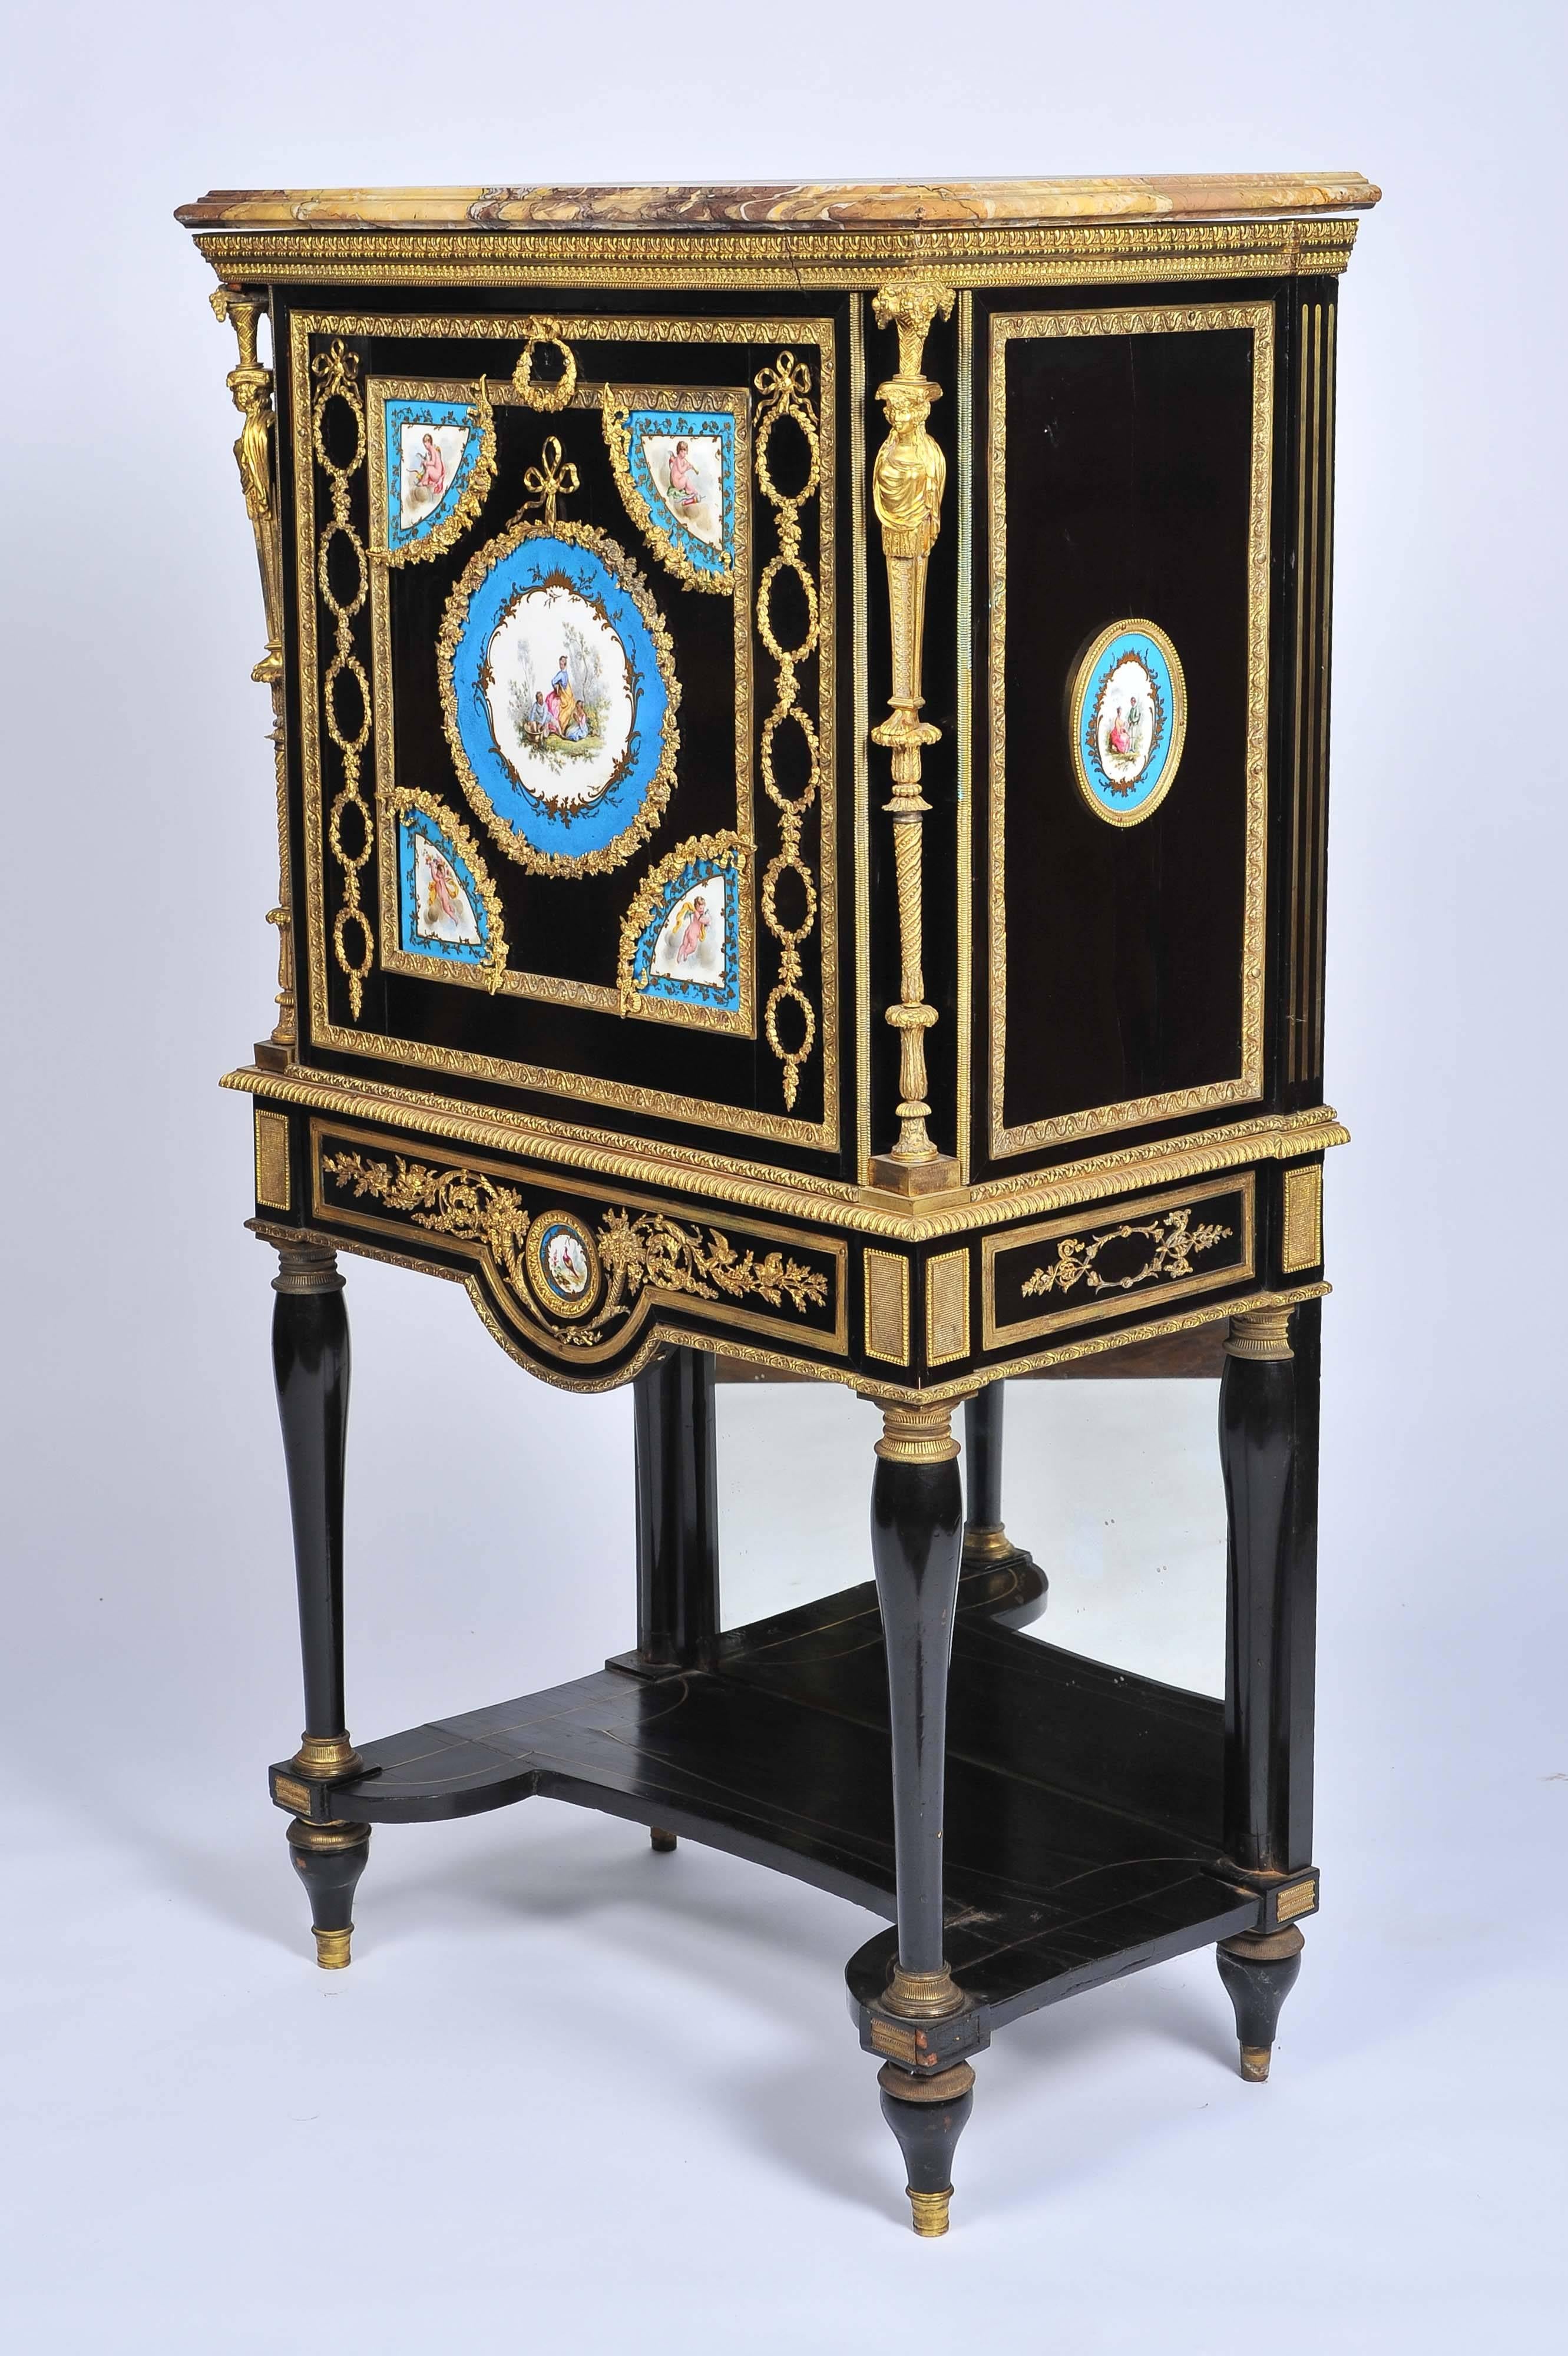 A fine quality 19th century French ebonized secretaire abattant, having its original brocatelle marble-top, classical gilded ormolu mounts of swag, ribbon and caryatid design. The fall front and sides having beautiful hand-painted 'Sevres' porcelain